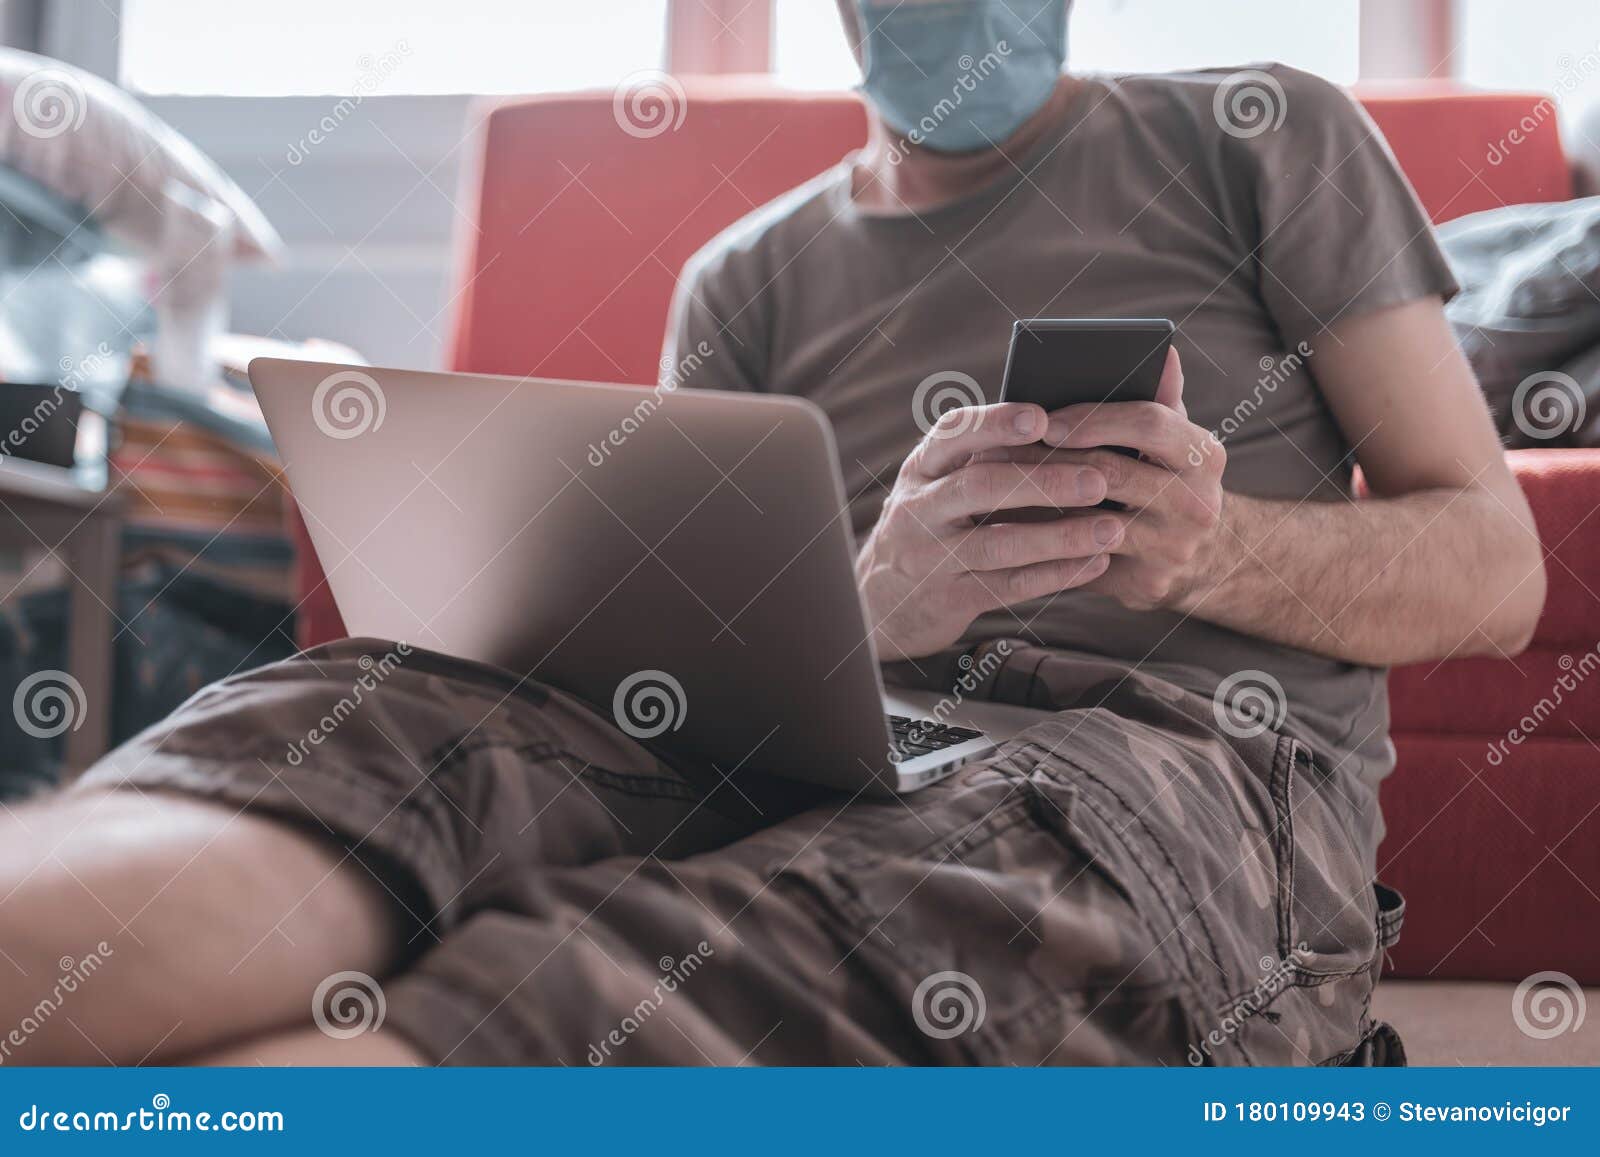 working from home - telecommuting during coronavirus outbreak